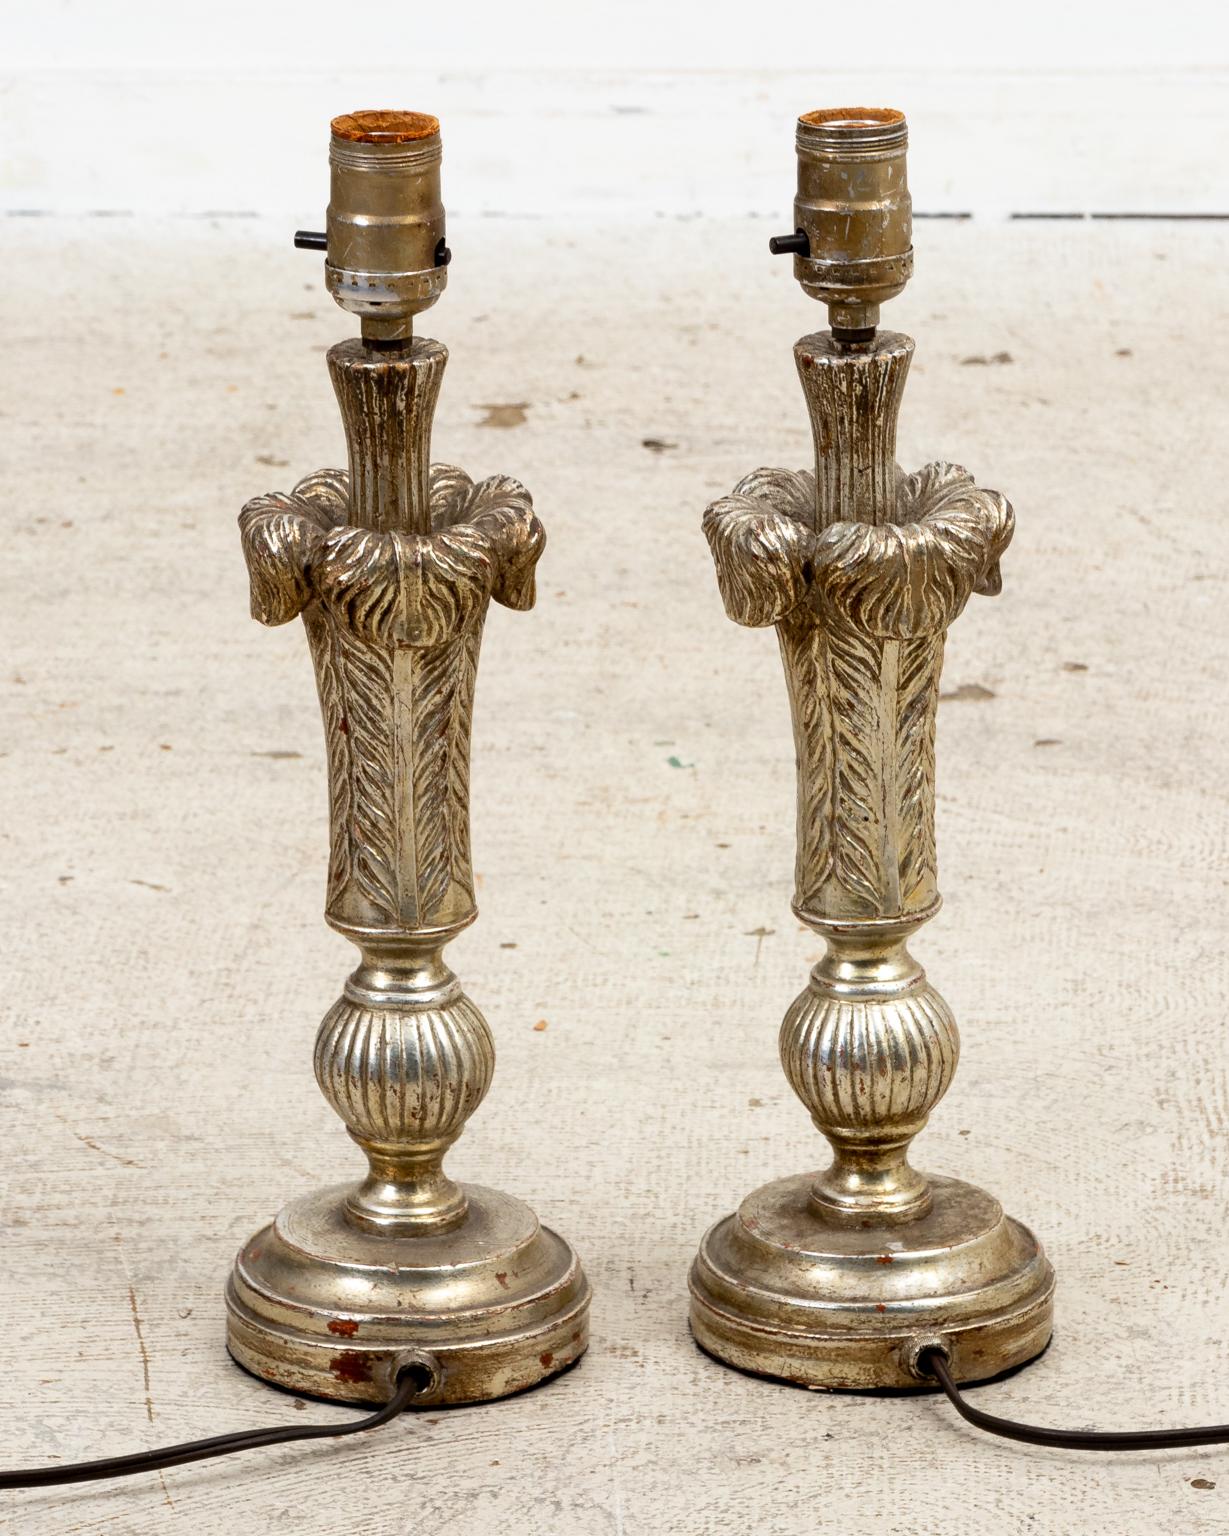 Circa mid-20th century Hollywood Regency style pair of plume form silvered gilt wood table lamps on rounded bases in the manner of Maison Jansen. Please note of wear consistent with age. Shades not included.